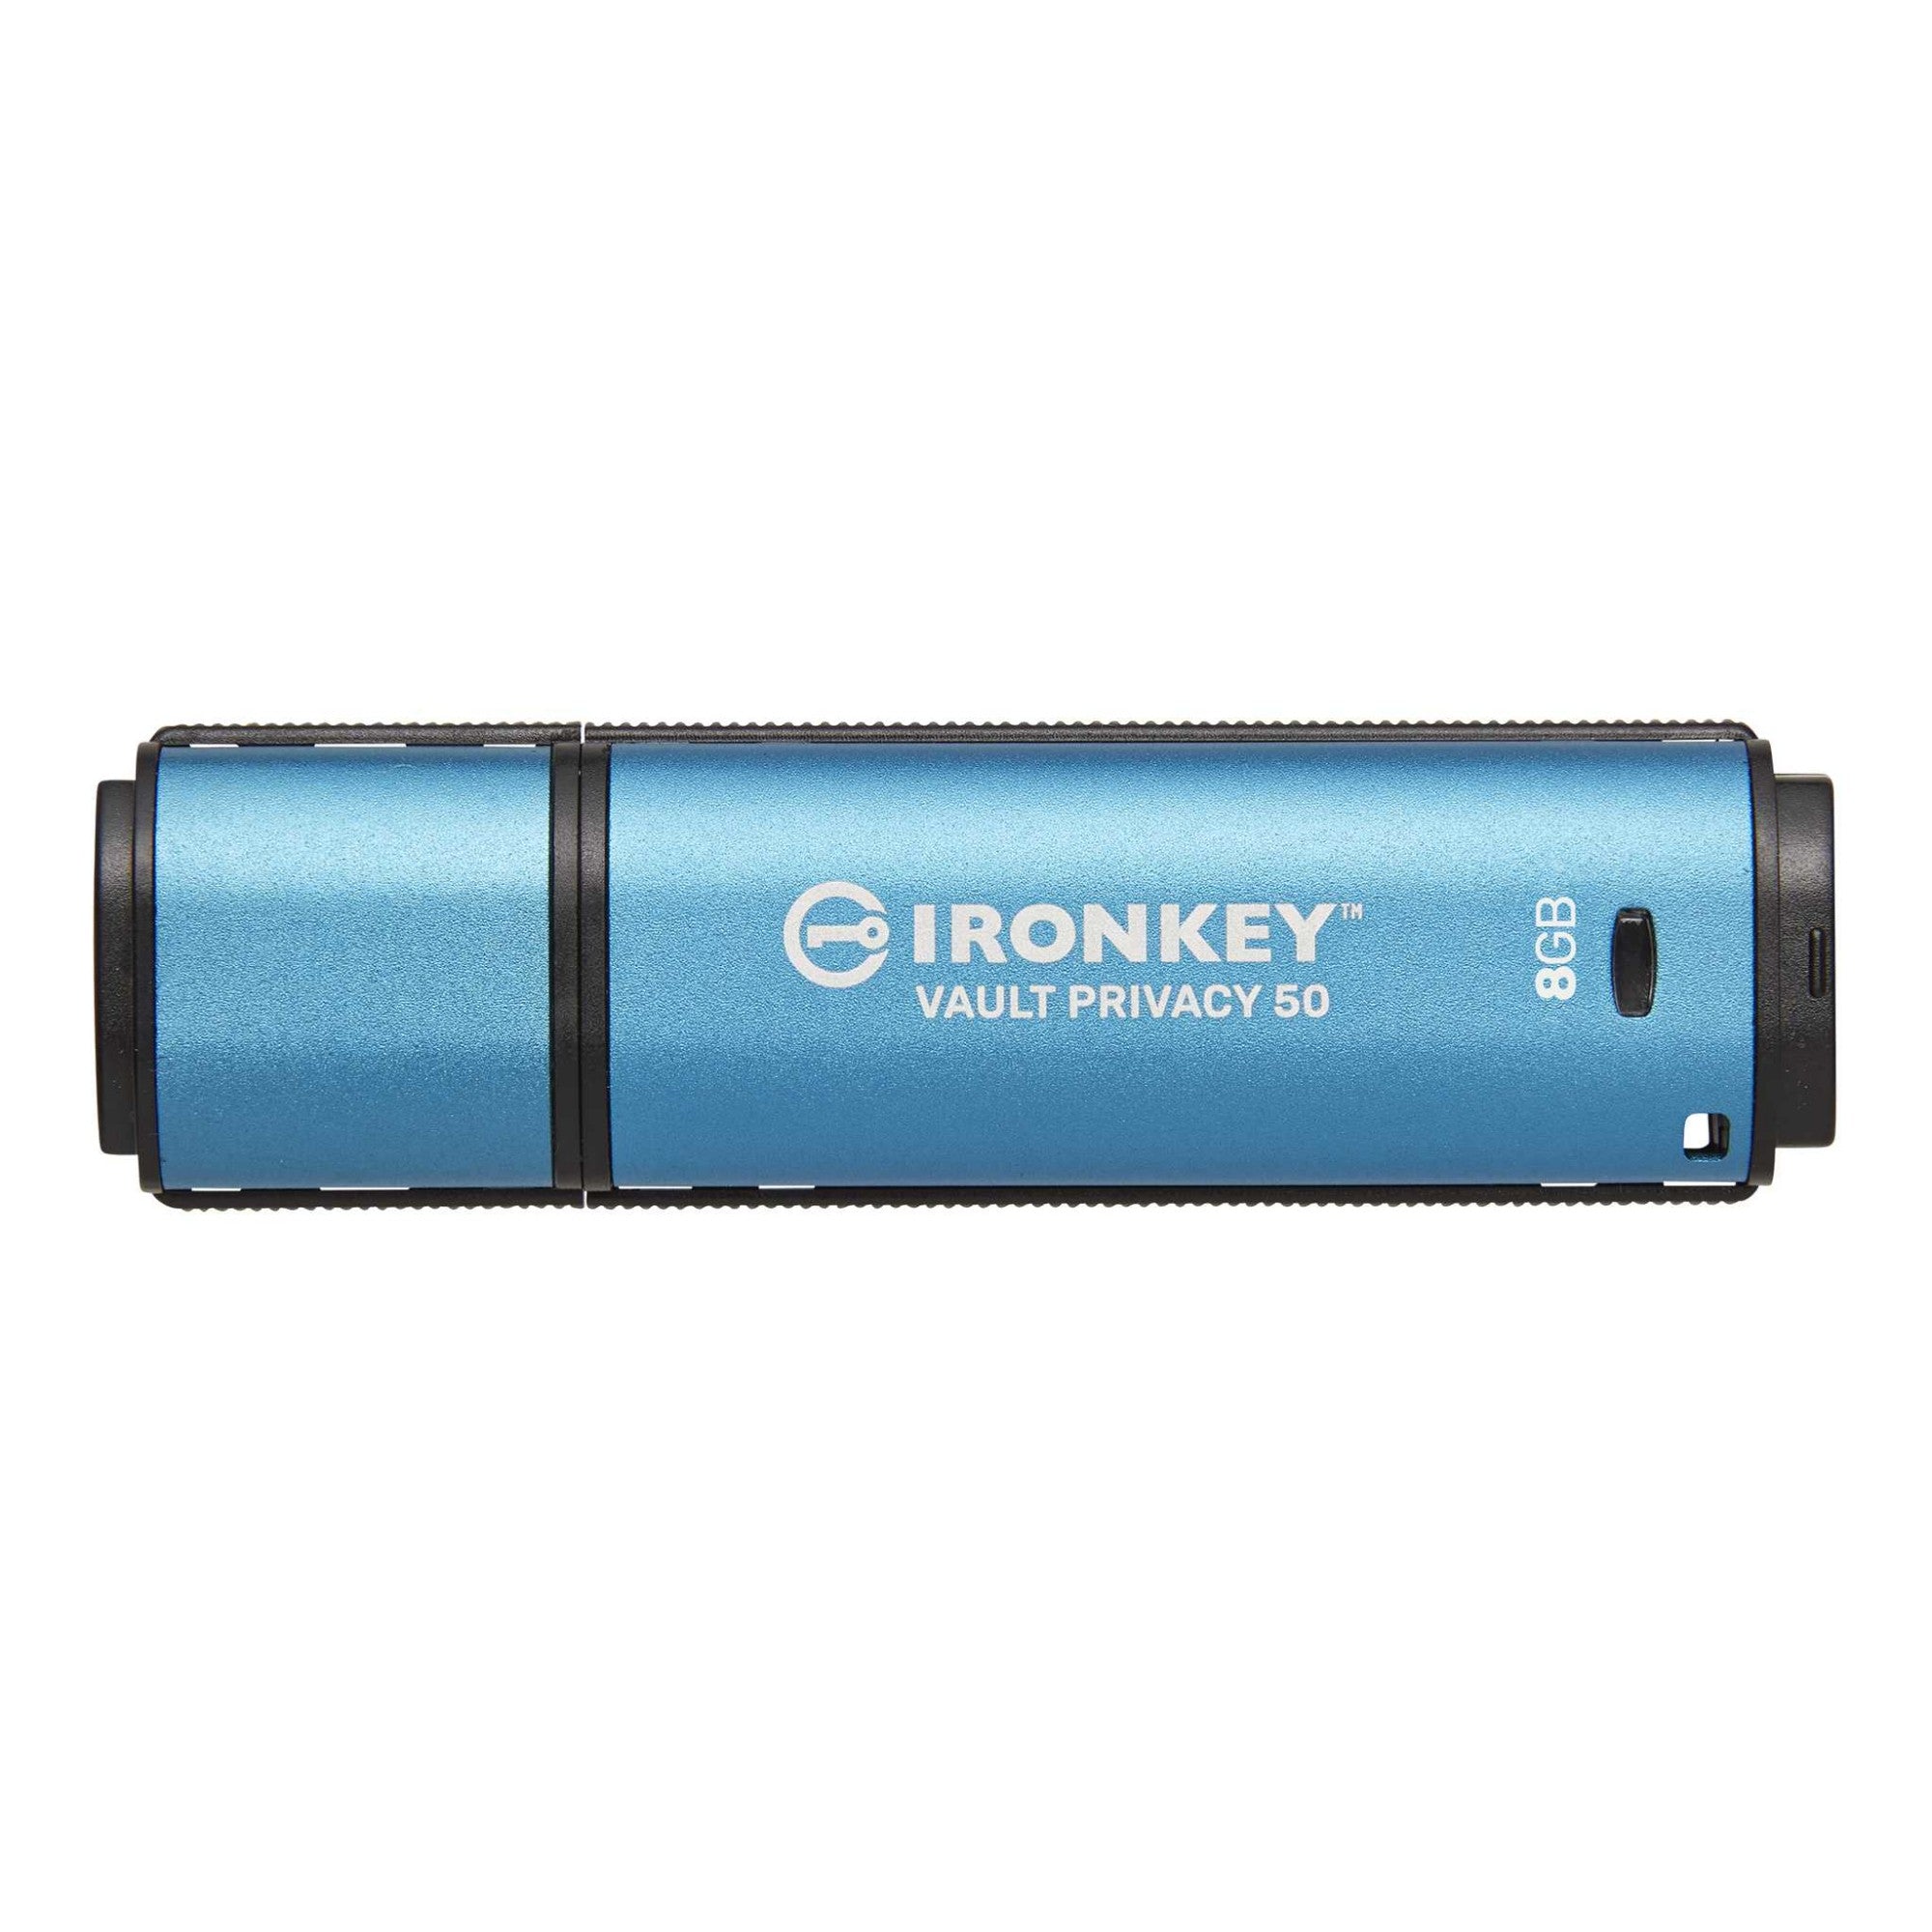 Kingston Technology IronKey 8GB Vault Privacy 50 AES-256 Encrypted, FIPS 197